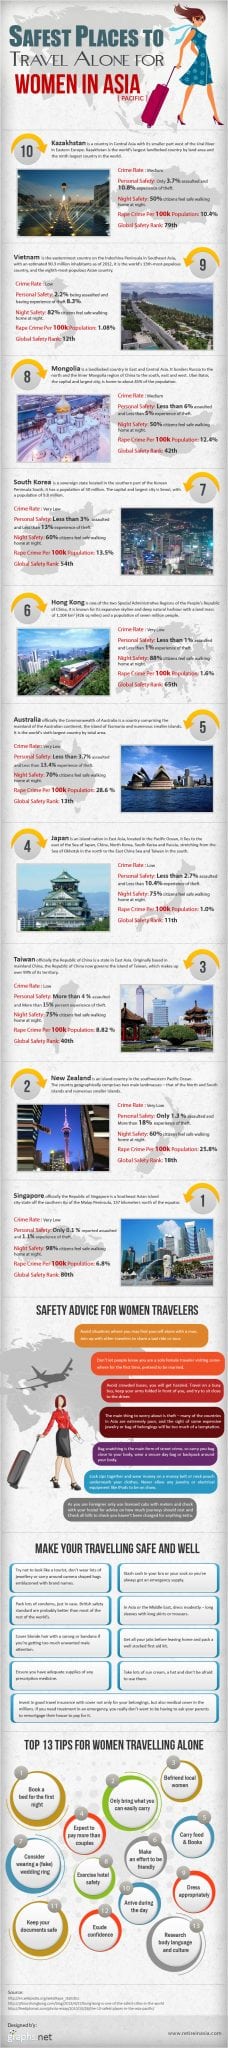 Safest-Places-to-Travel-alone-for-Women-in-Asia-infographic (1)